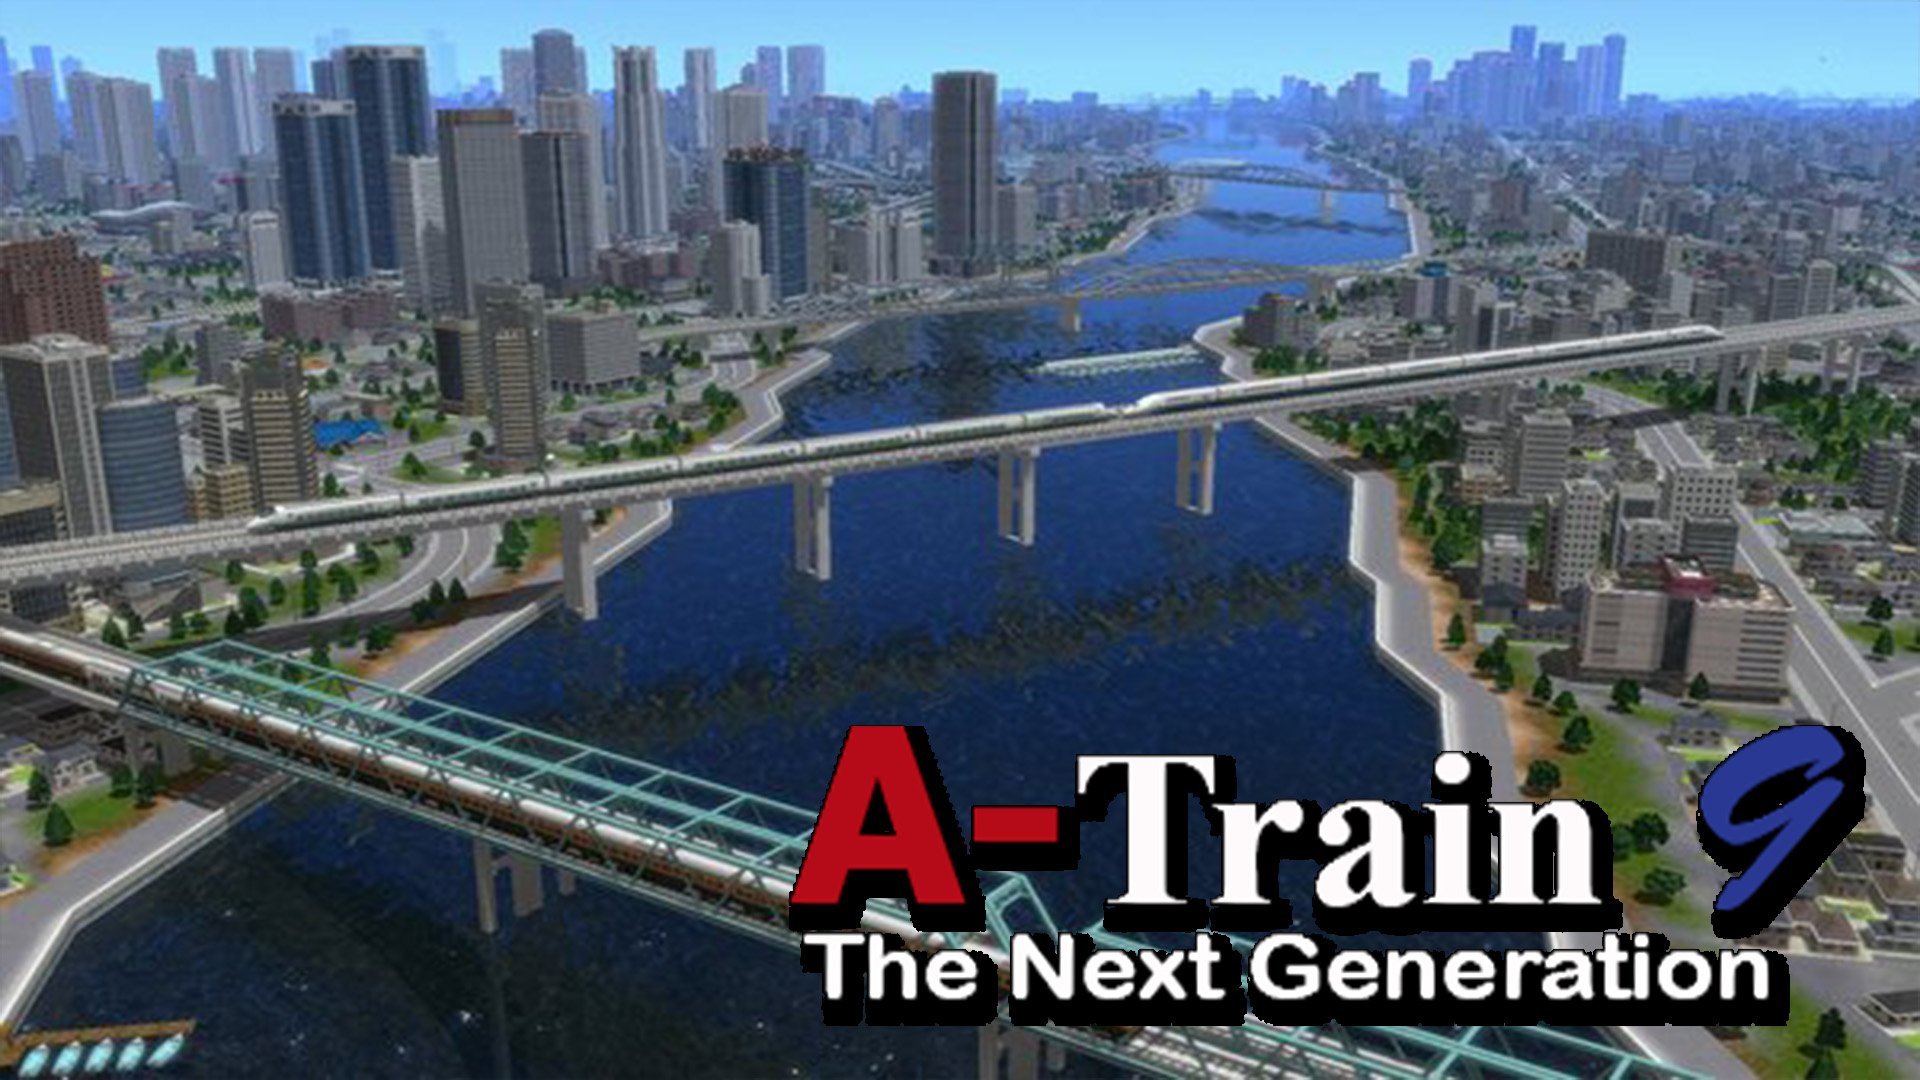 Video Game A-Train 9: The Next Generation HD Wallpaper | Background Image